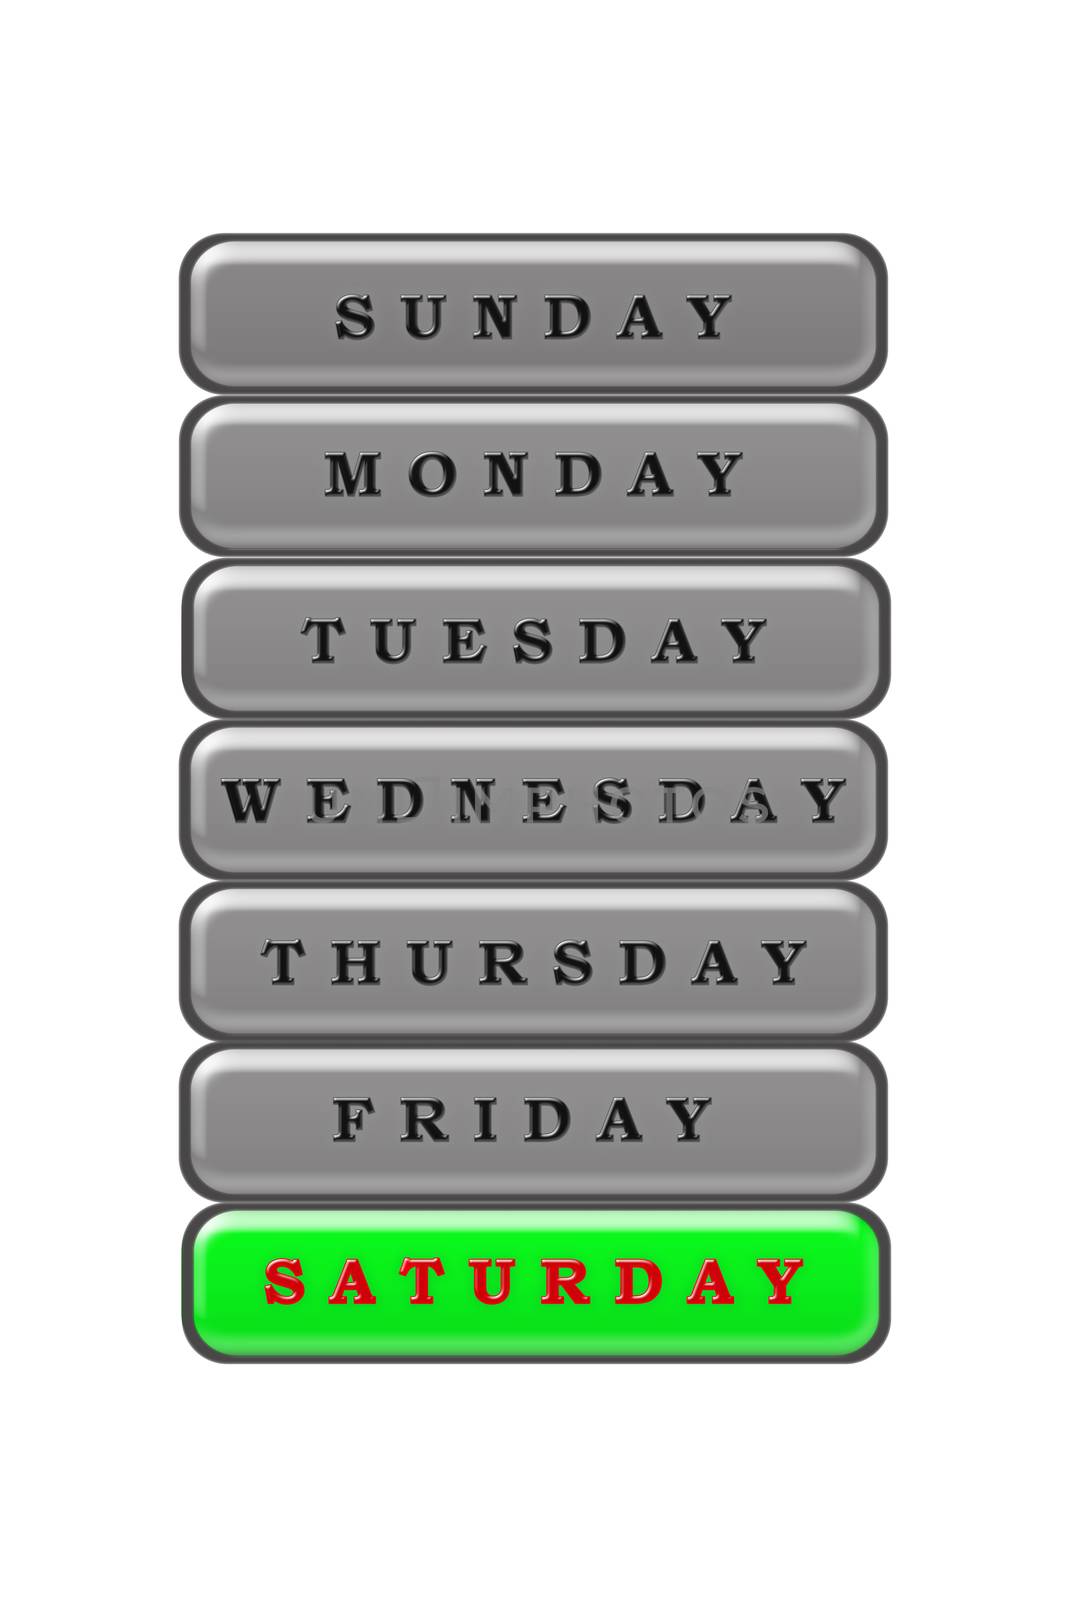 In the days of the week list, Saturday is highlighted in red on  by Grommik